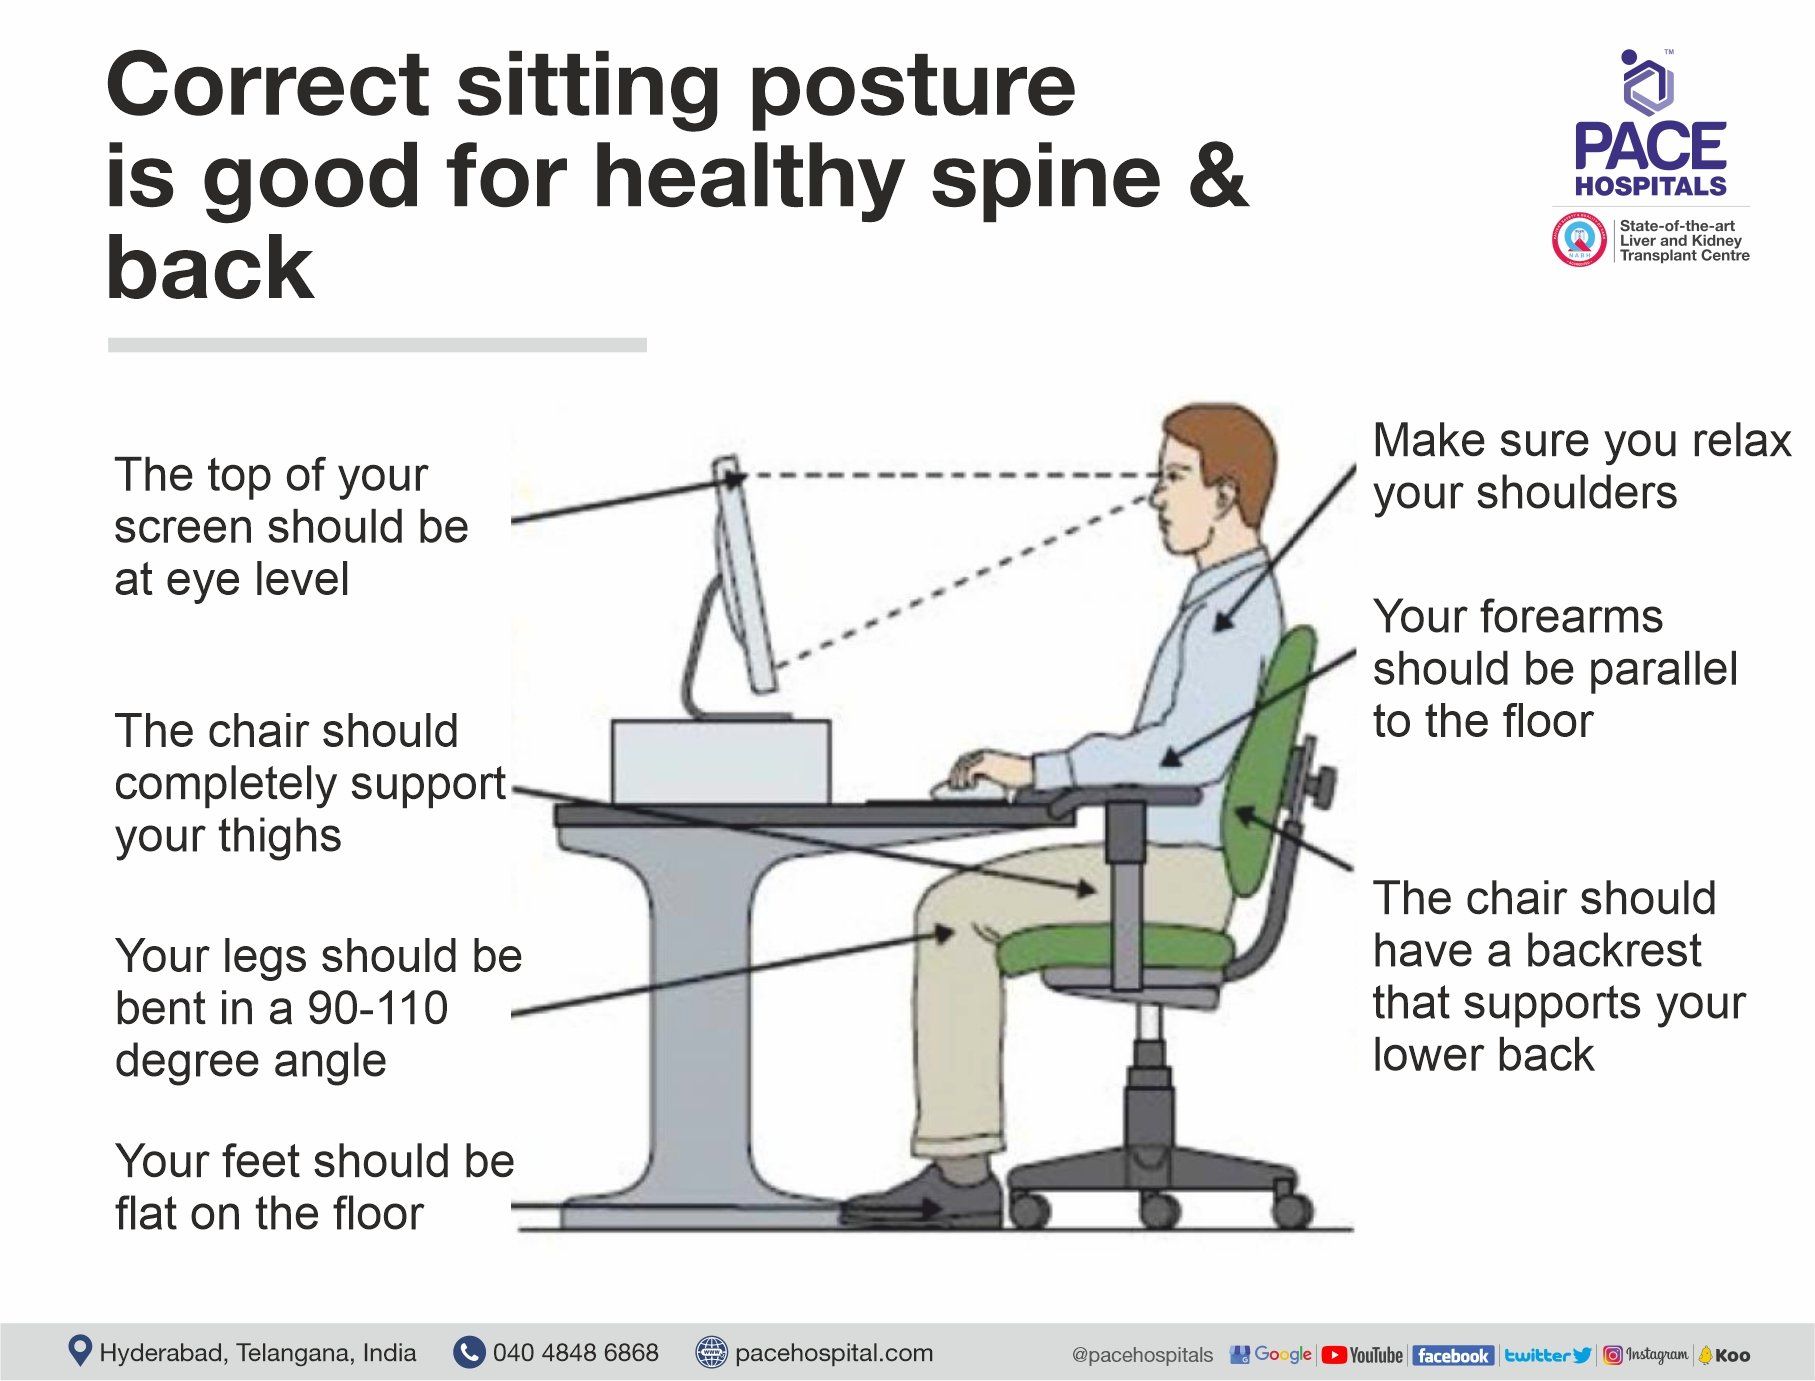 Correct sitting posture is good for healthy spine and back | Pace Hospitals